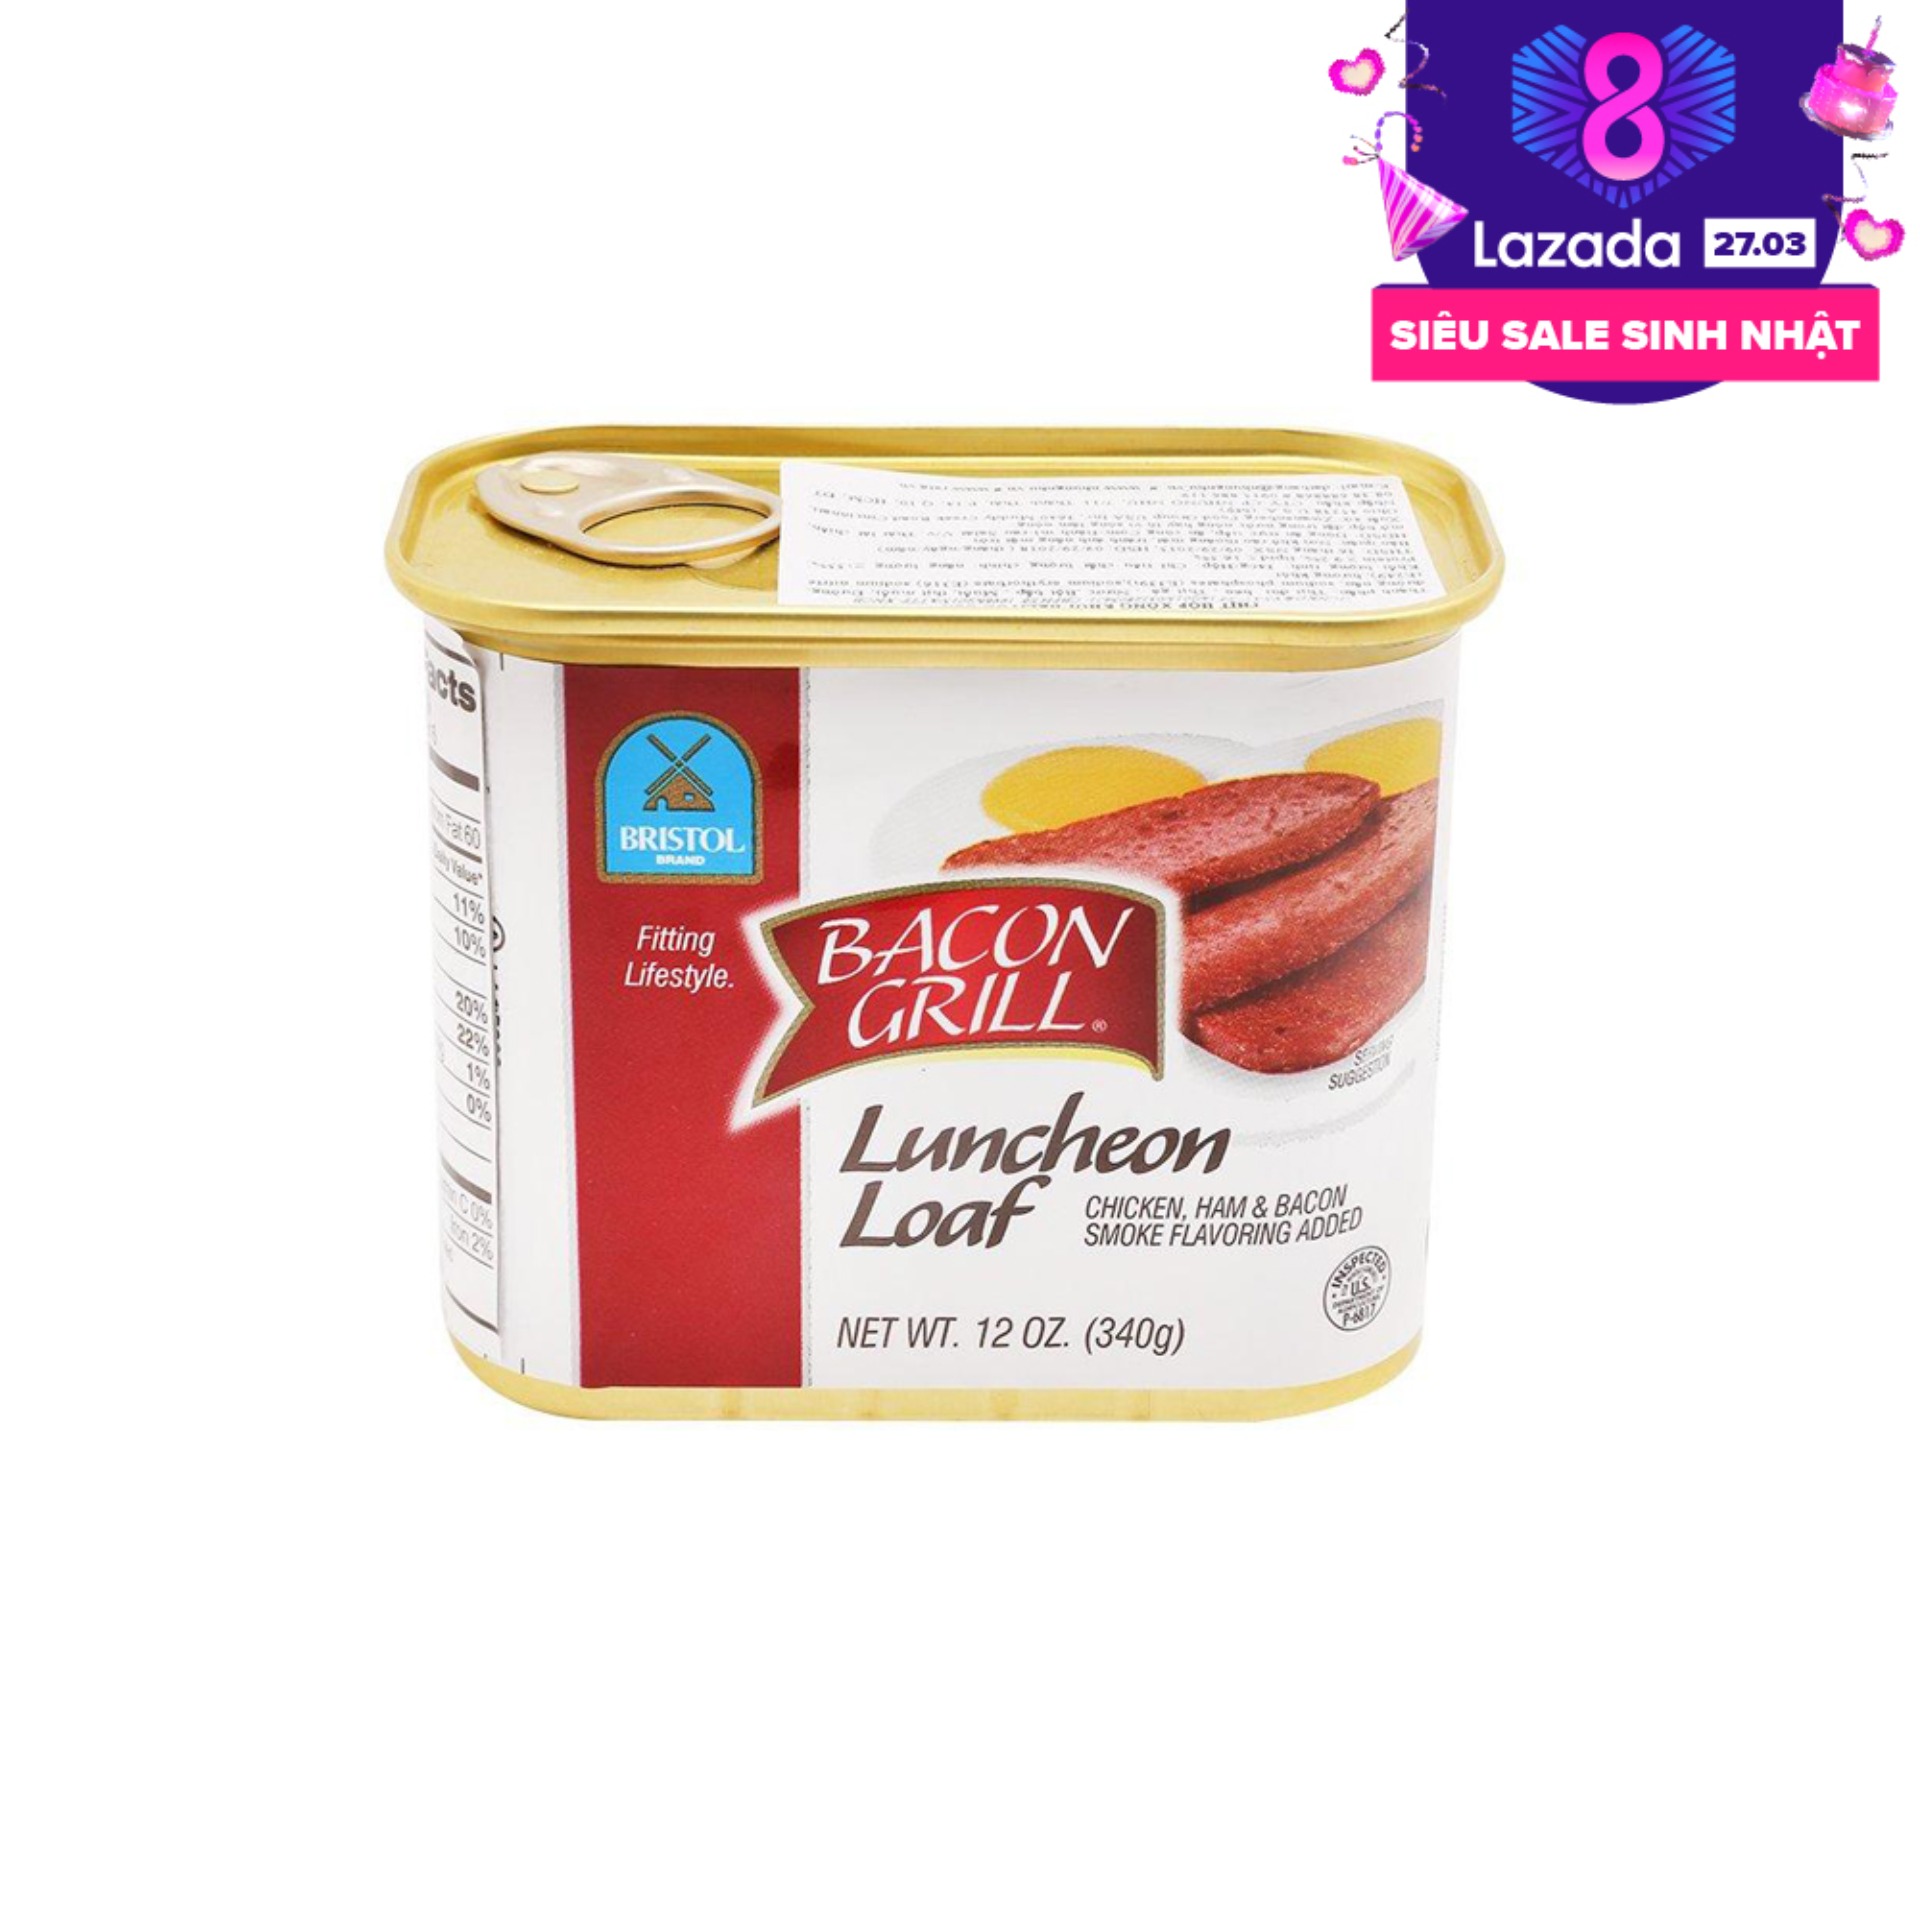 Thịt Hộp Xông Khói Bristol Bacon Grill Luncheon Loaf 340g Product From